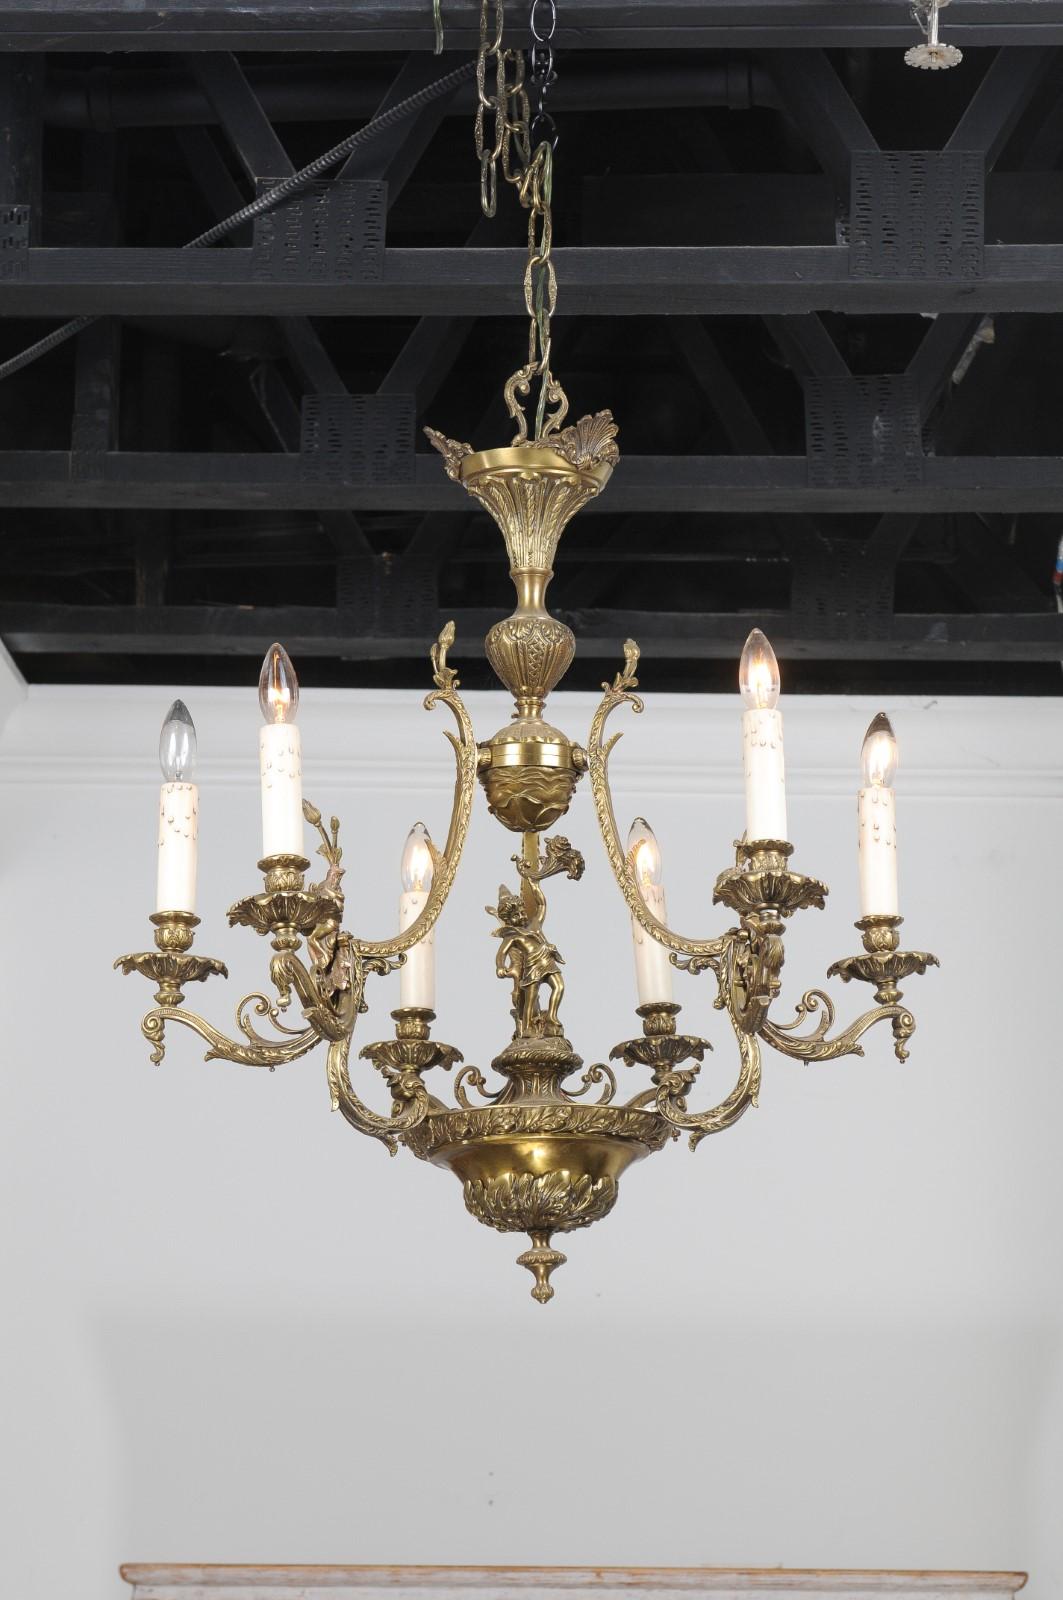 A Spanish bronze six-light chandelier from the 19th century with cherubs, floral and foliage motifs. Our eyes are immediately drawn to this bronze chandelier created in Spain during the 19th century. A delicate foliage decor adorns the structure and